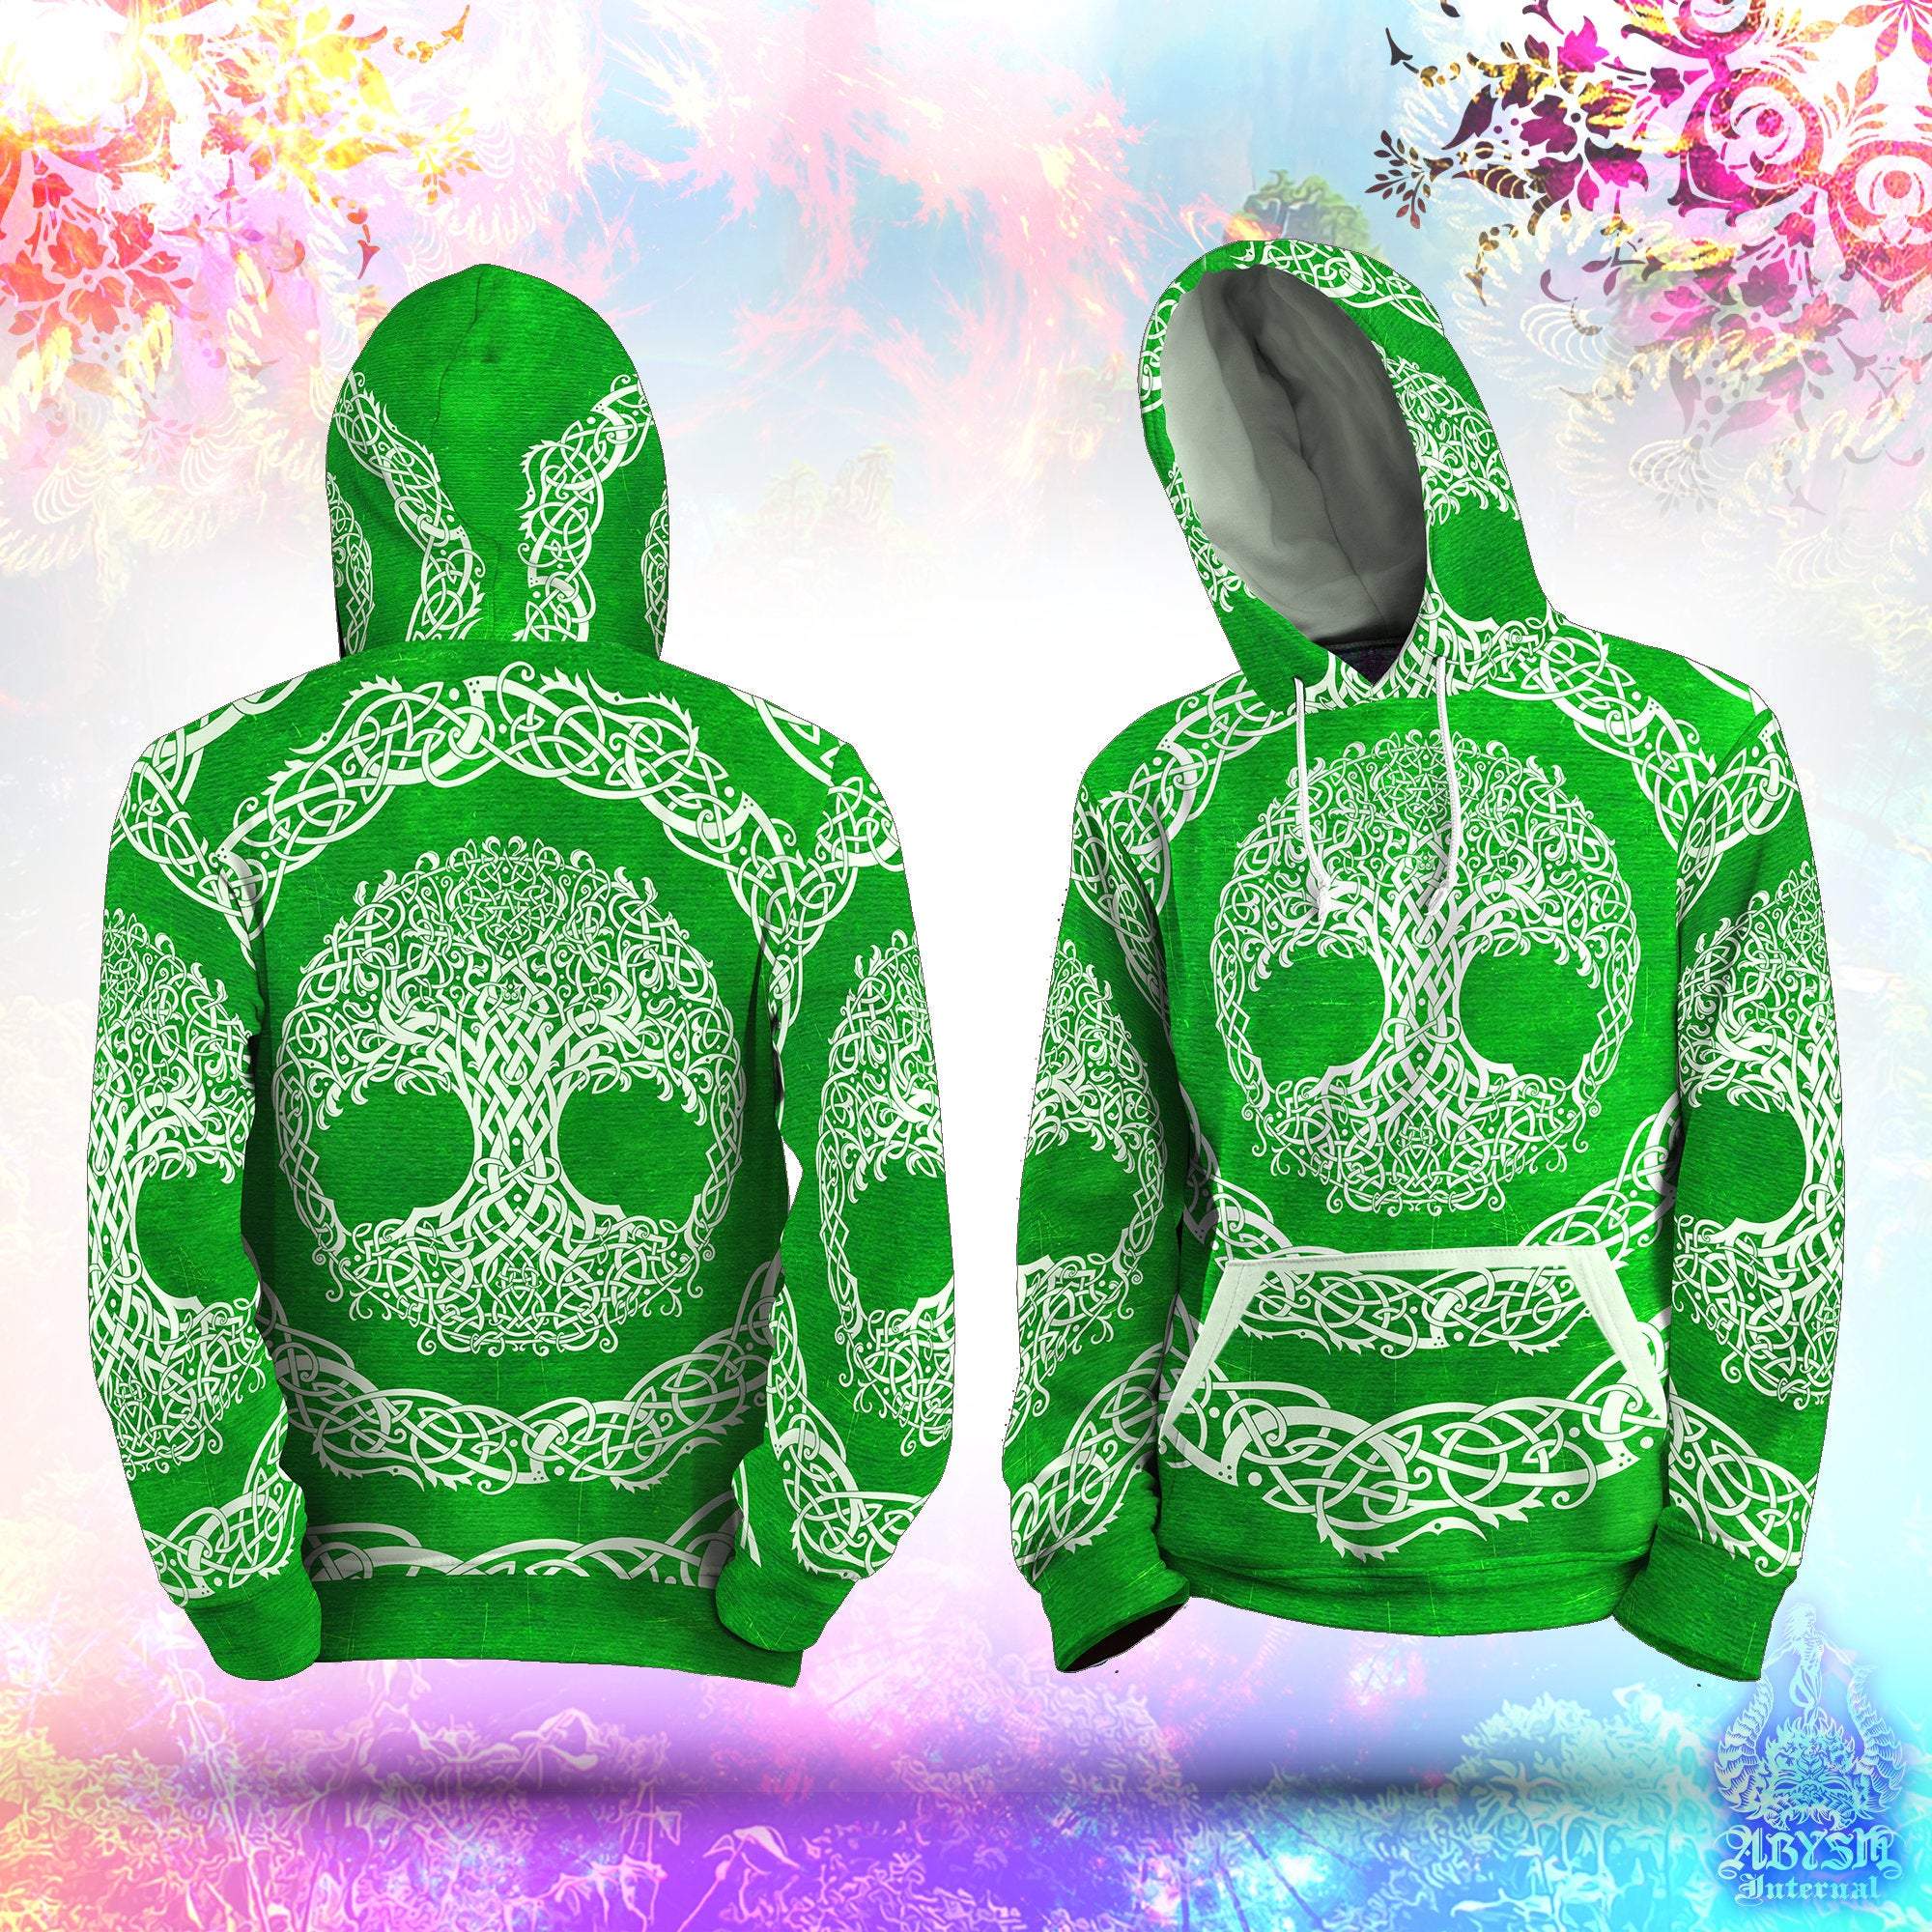 Tree of Life Hoodie, Boho Outfit, Indie Sweater, Witchy Streetwear, Alternative Clothing, Unisex - Celtic, Green - Abysm Internal